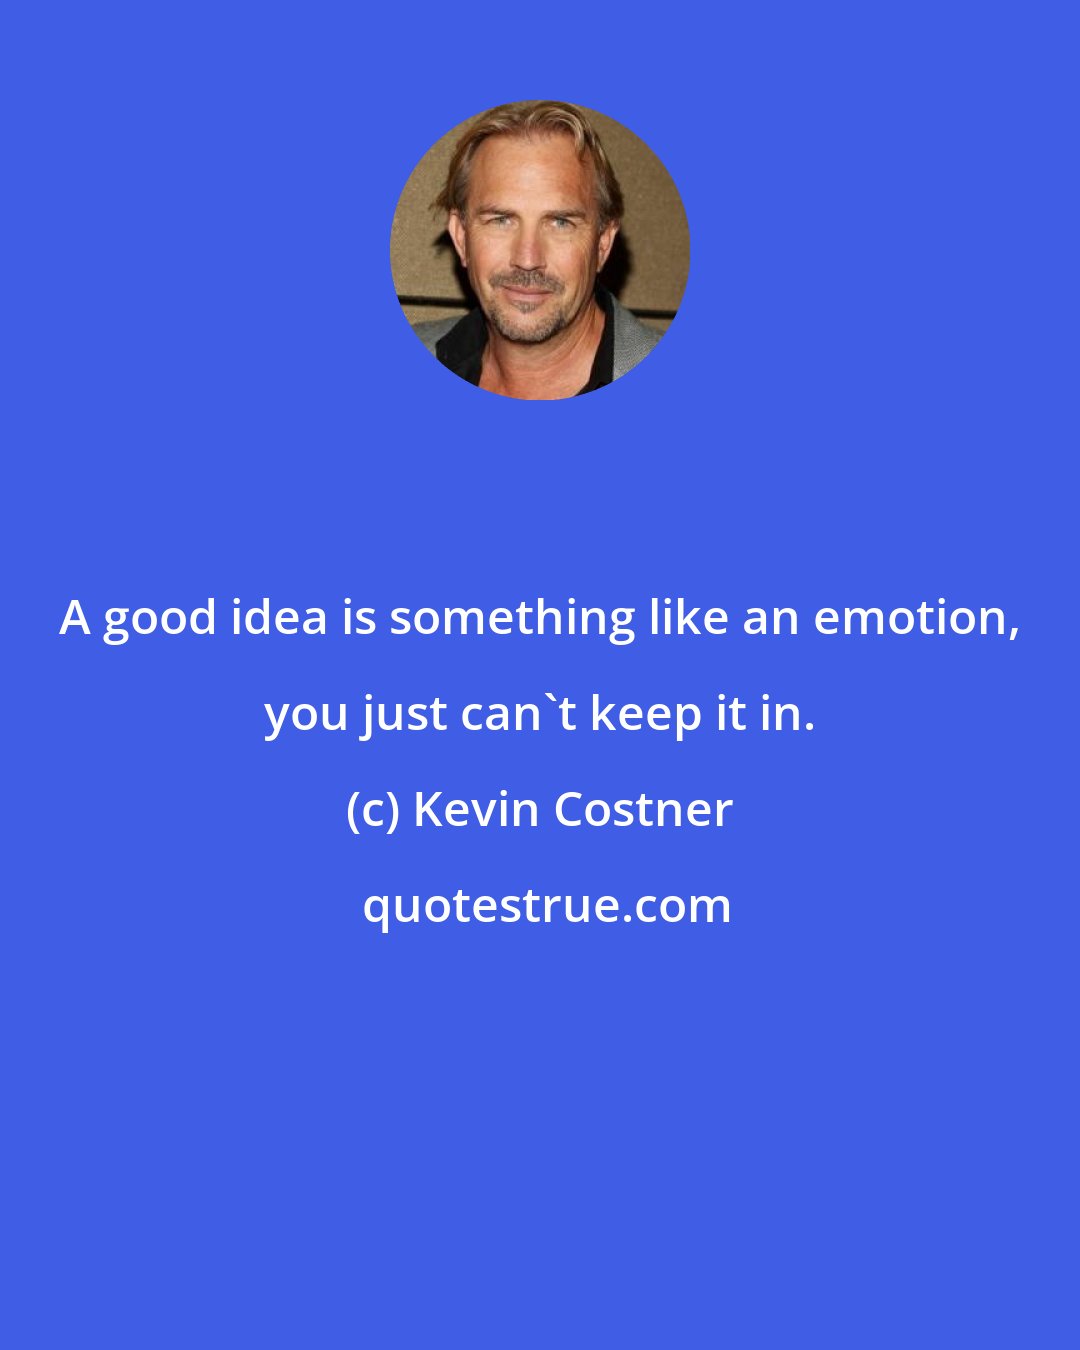 Kevin Costner: A good idea is something like an emotion, you just can't keep it in.